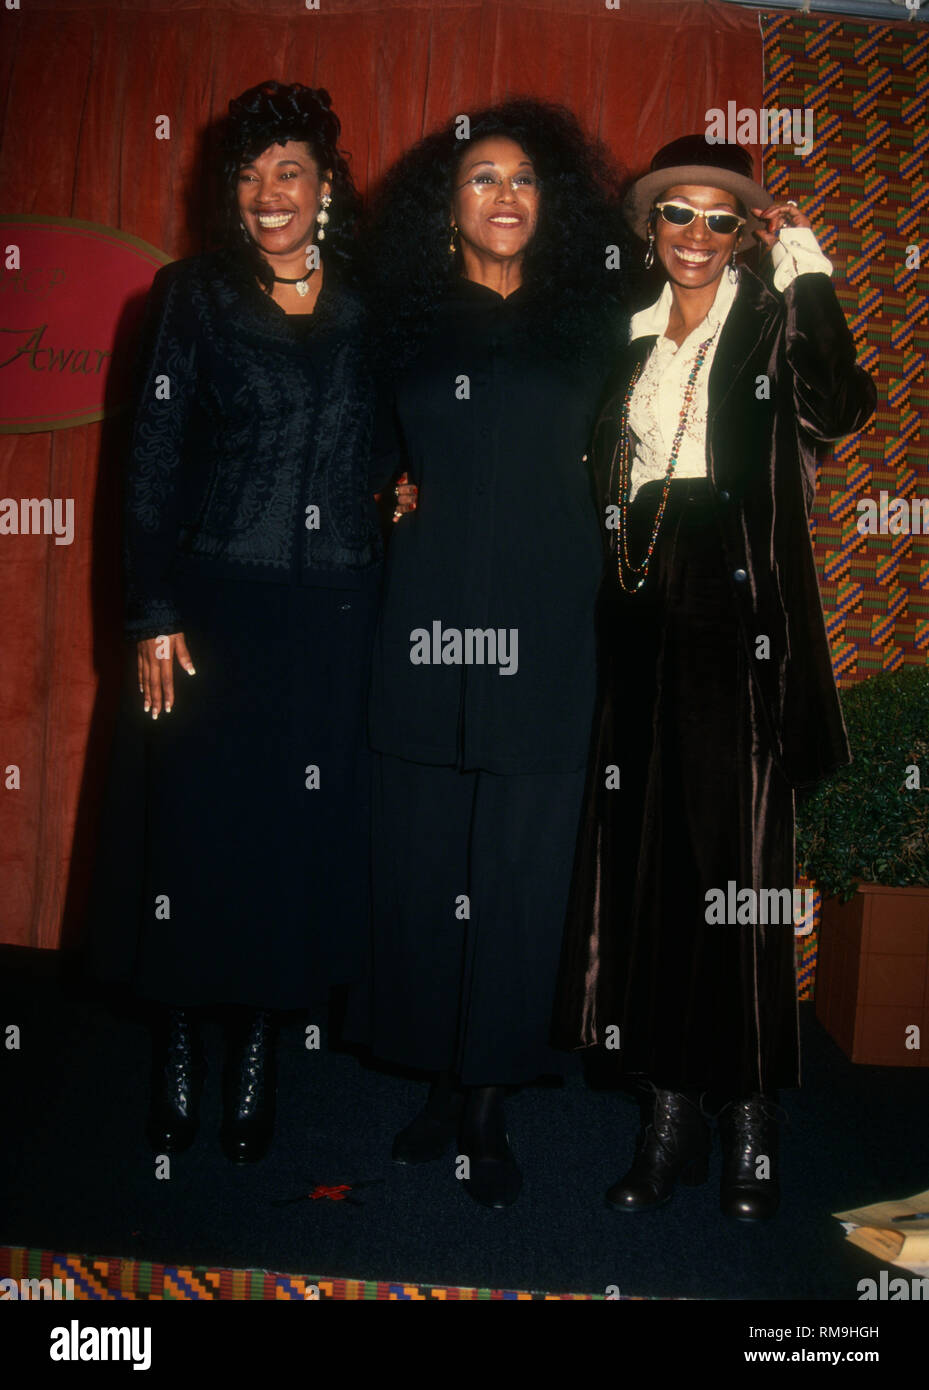 PASADENA, CA - JANUARY 5: (L-R) Singers/sisters Anita Pointer, Ruth Pointer and June Pointer attend the 26th Annual NAACP Image Awards on January 5, 1993 at Pasadena Civic Auditorium in Pasadena, California. Photo by Barry King/Alamy Stock Photo Stock Photo